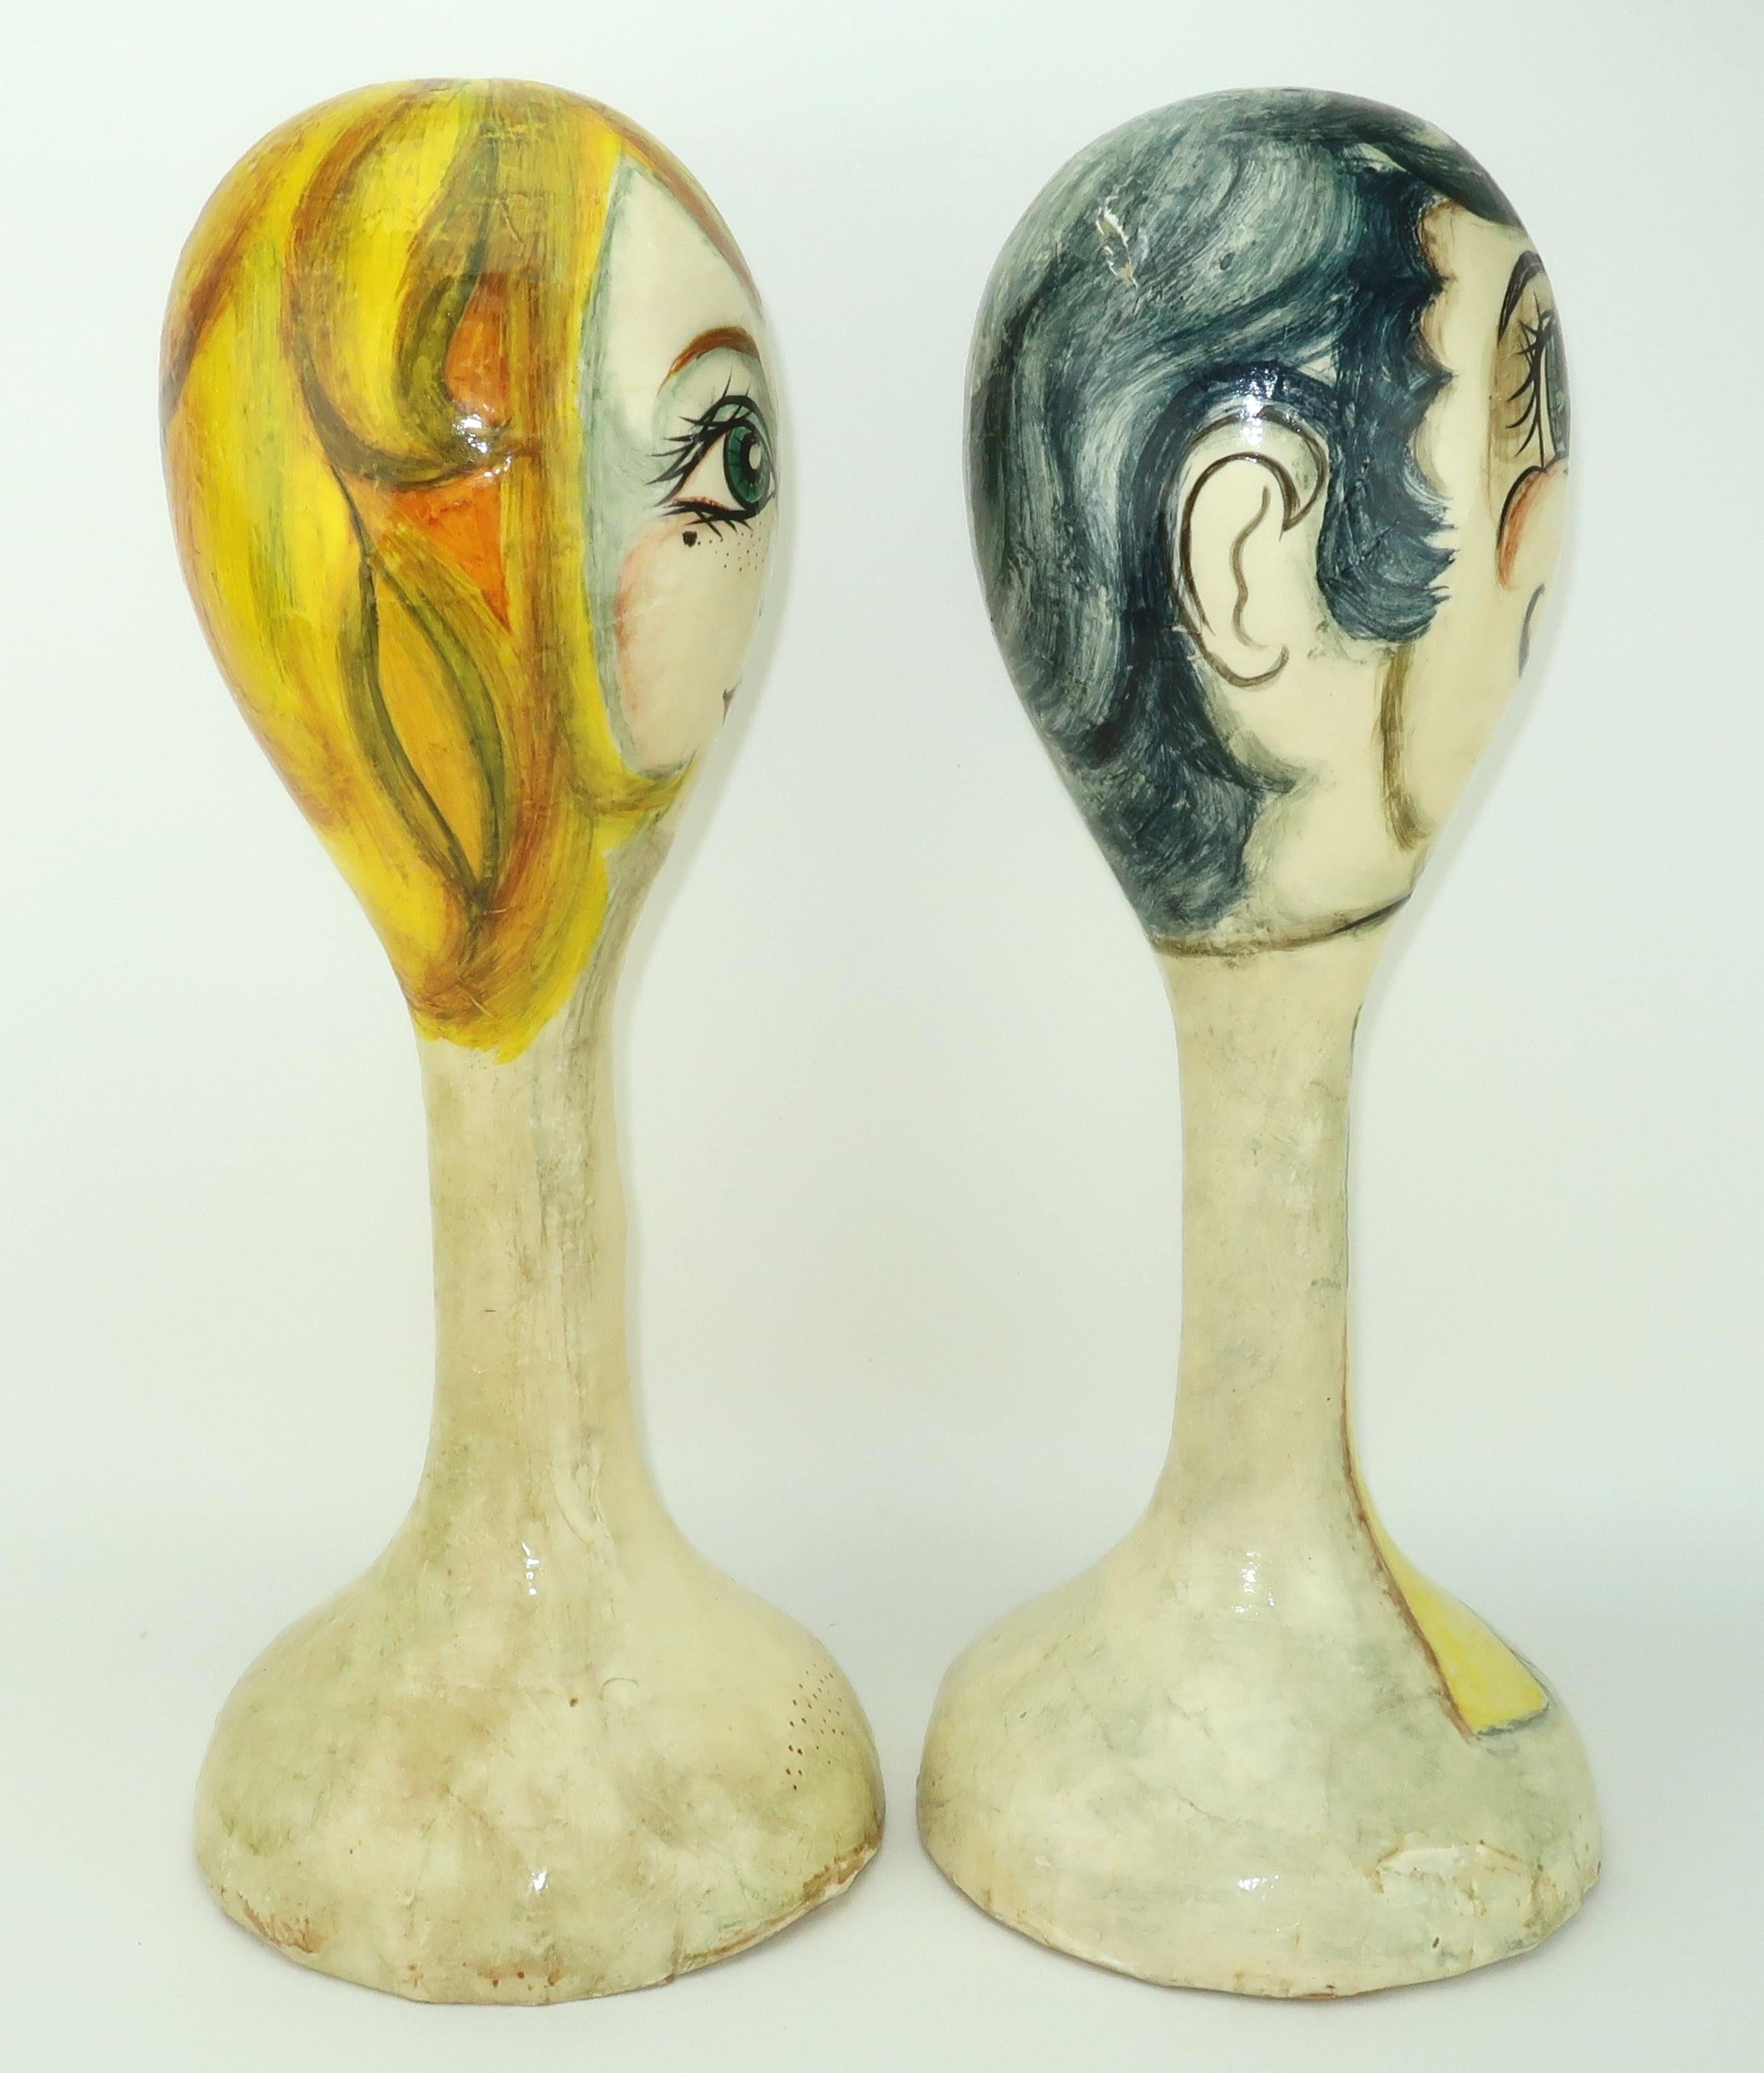 Two heads are better than one! Adorable pair of Mexican folk art papier mache heads by De Sela depicting a glamorous woman and her dapper gentleman. The woman sports a blonde hairdo with sparkling eyes, long lashes and bow lips. The whimsical